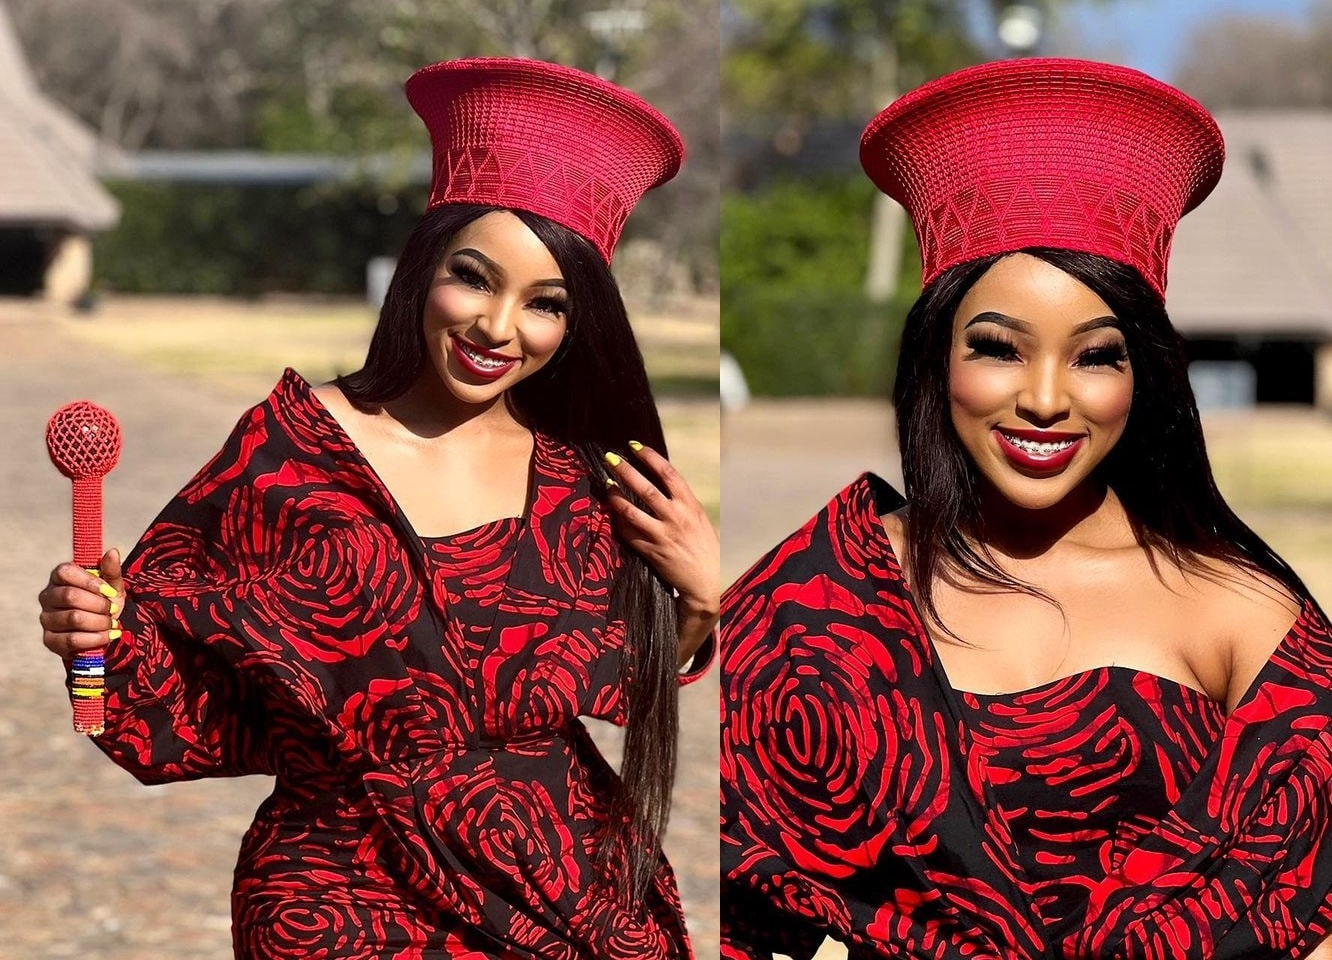 She's young: The Queen actress Olerato Lorraine Moropa's age shocks Mzansi as she celebrates her birthday